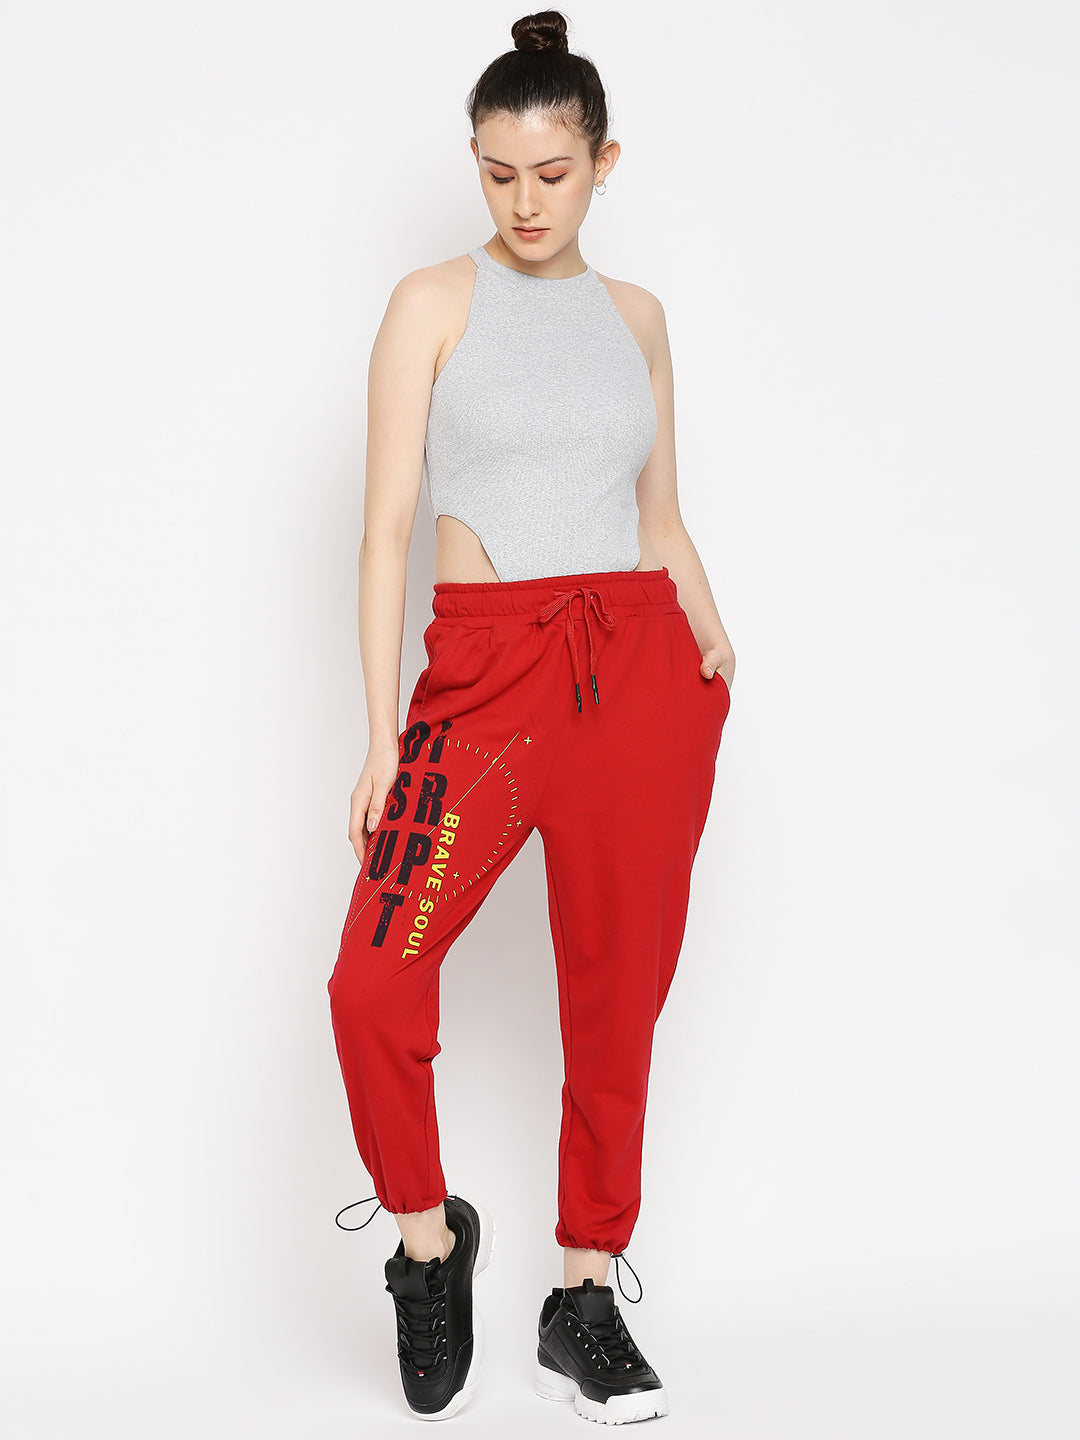 Disrupt Red Graphic Print Regular Fit Joggers For Women